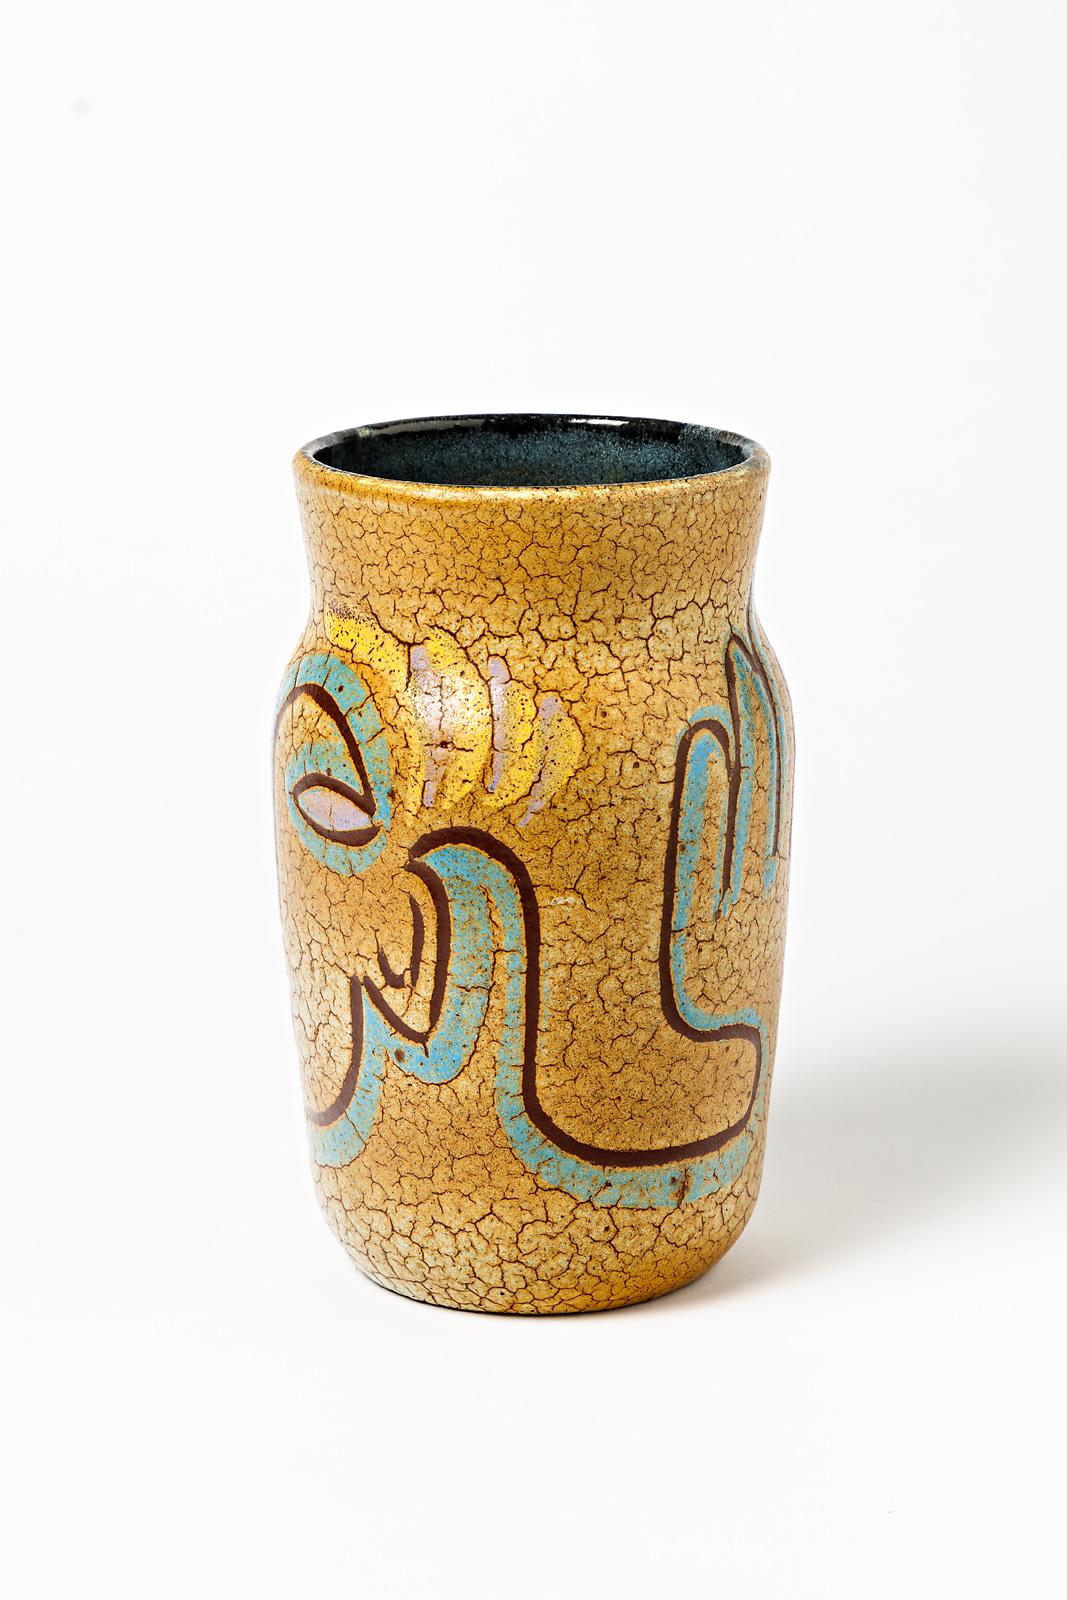 Accolay

Rare and decorative ceramic vase, circa 1950

Original mid-20th century visage decoration with yellow and blue ceramic glazes colors.

Original prefect conditions

Measures: Height 23cm, large 13cm

Other Accolay ceramic piece on